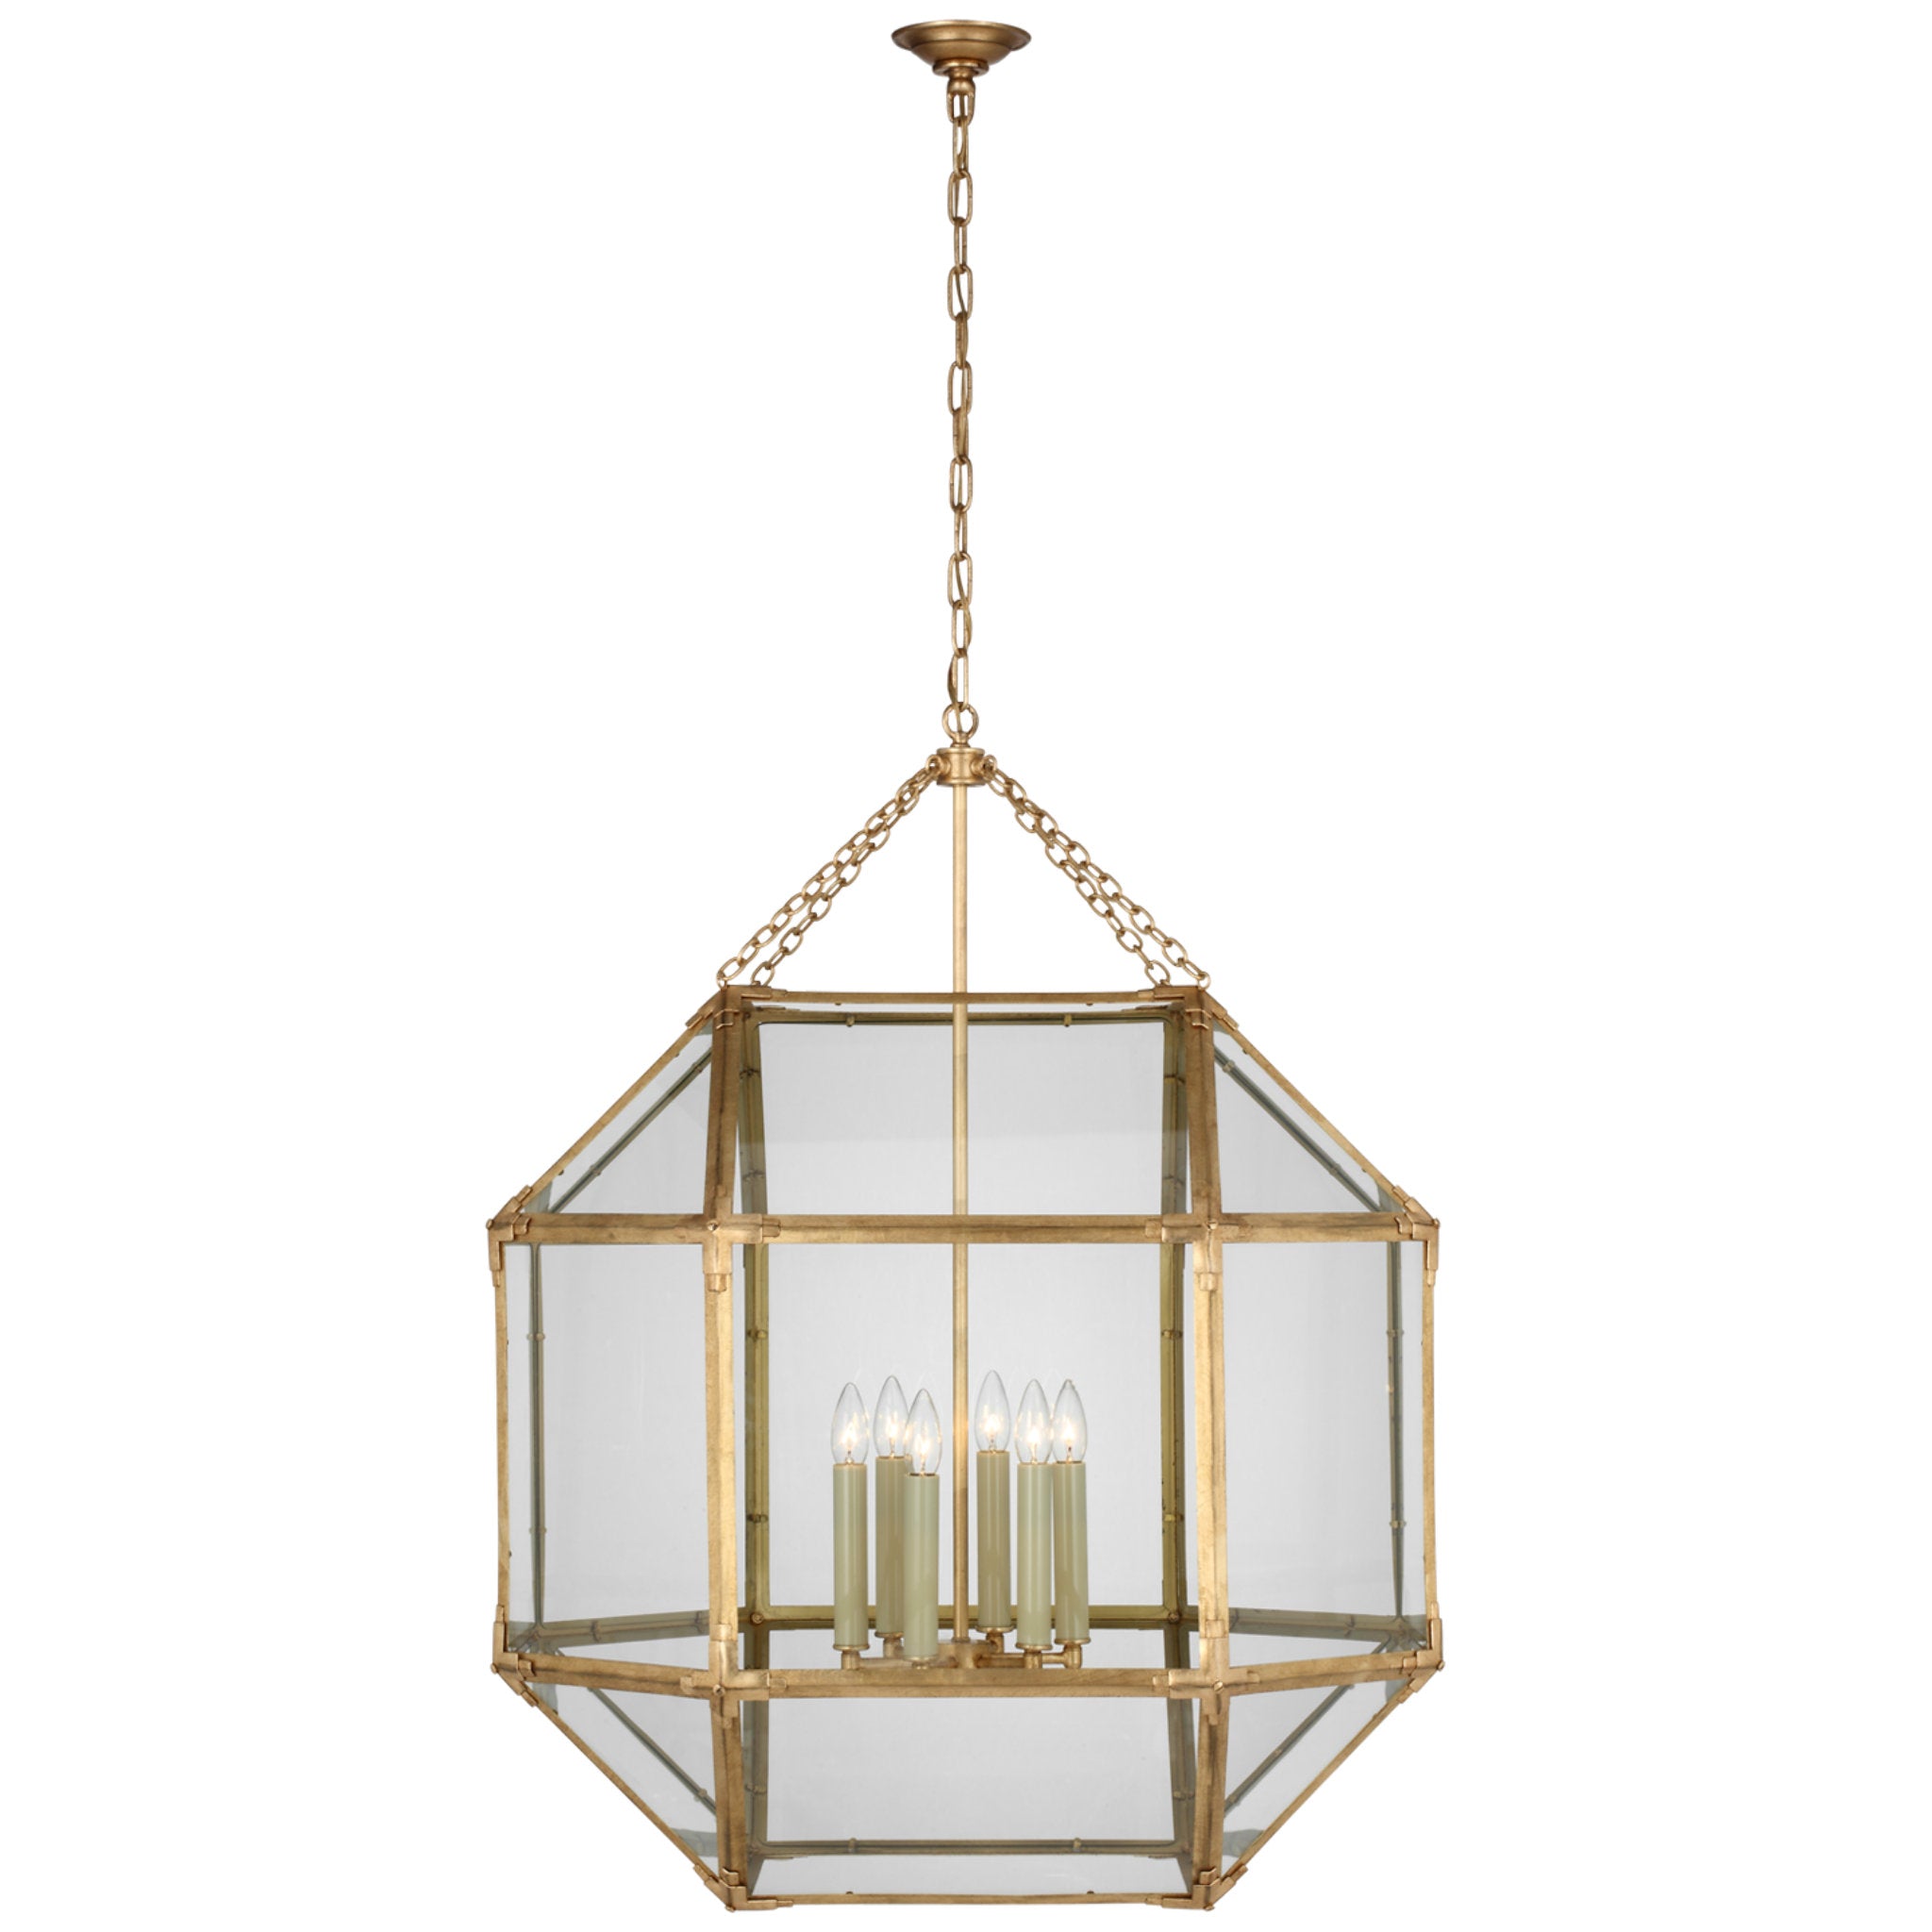 Suzanne Kasler Morris Grande Lantern in Gilded Iron with Clear Glass